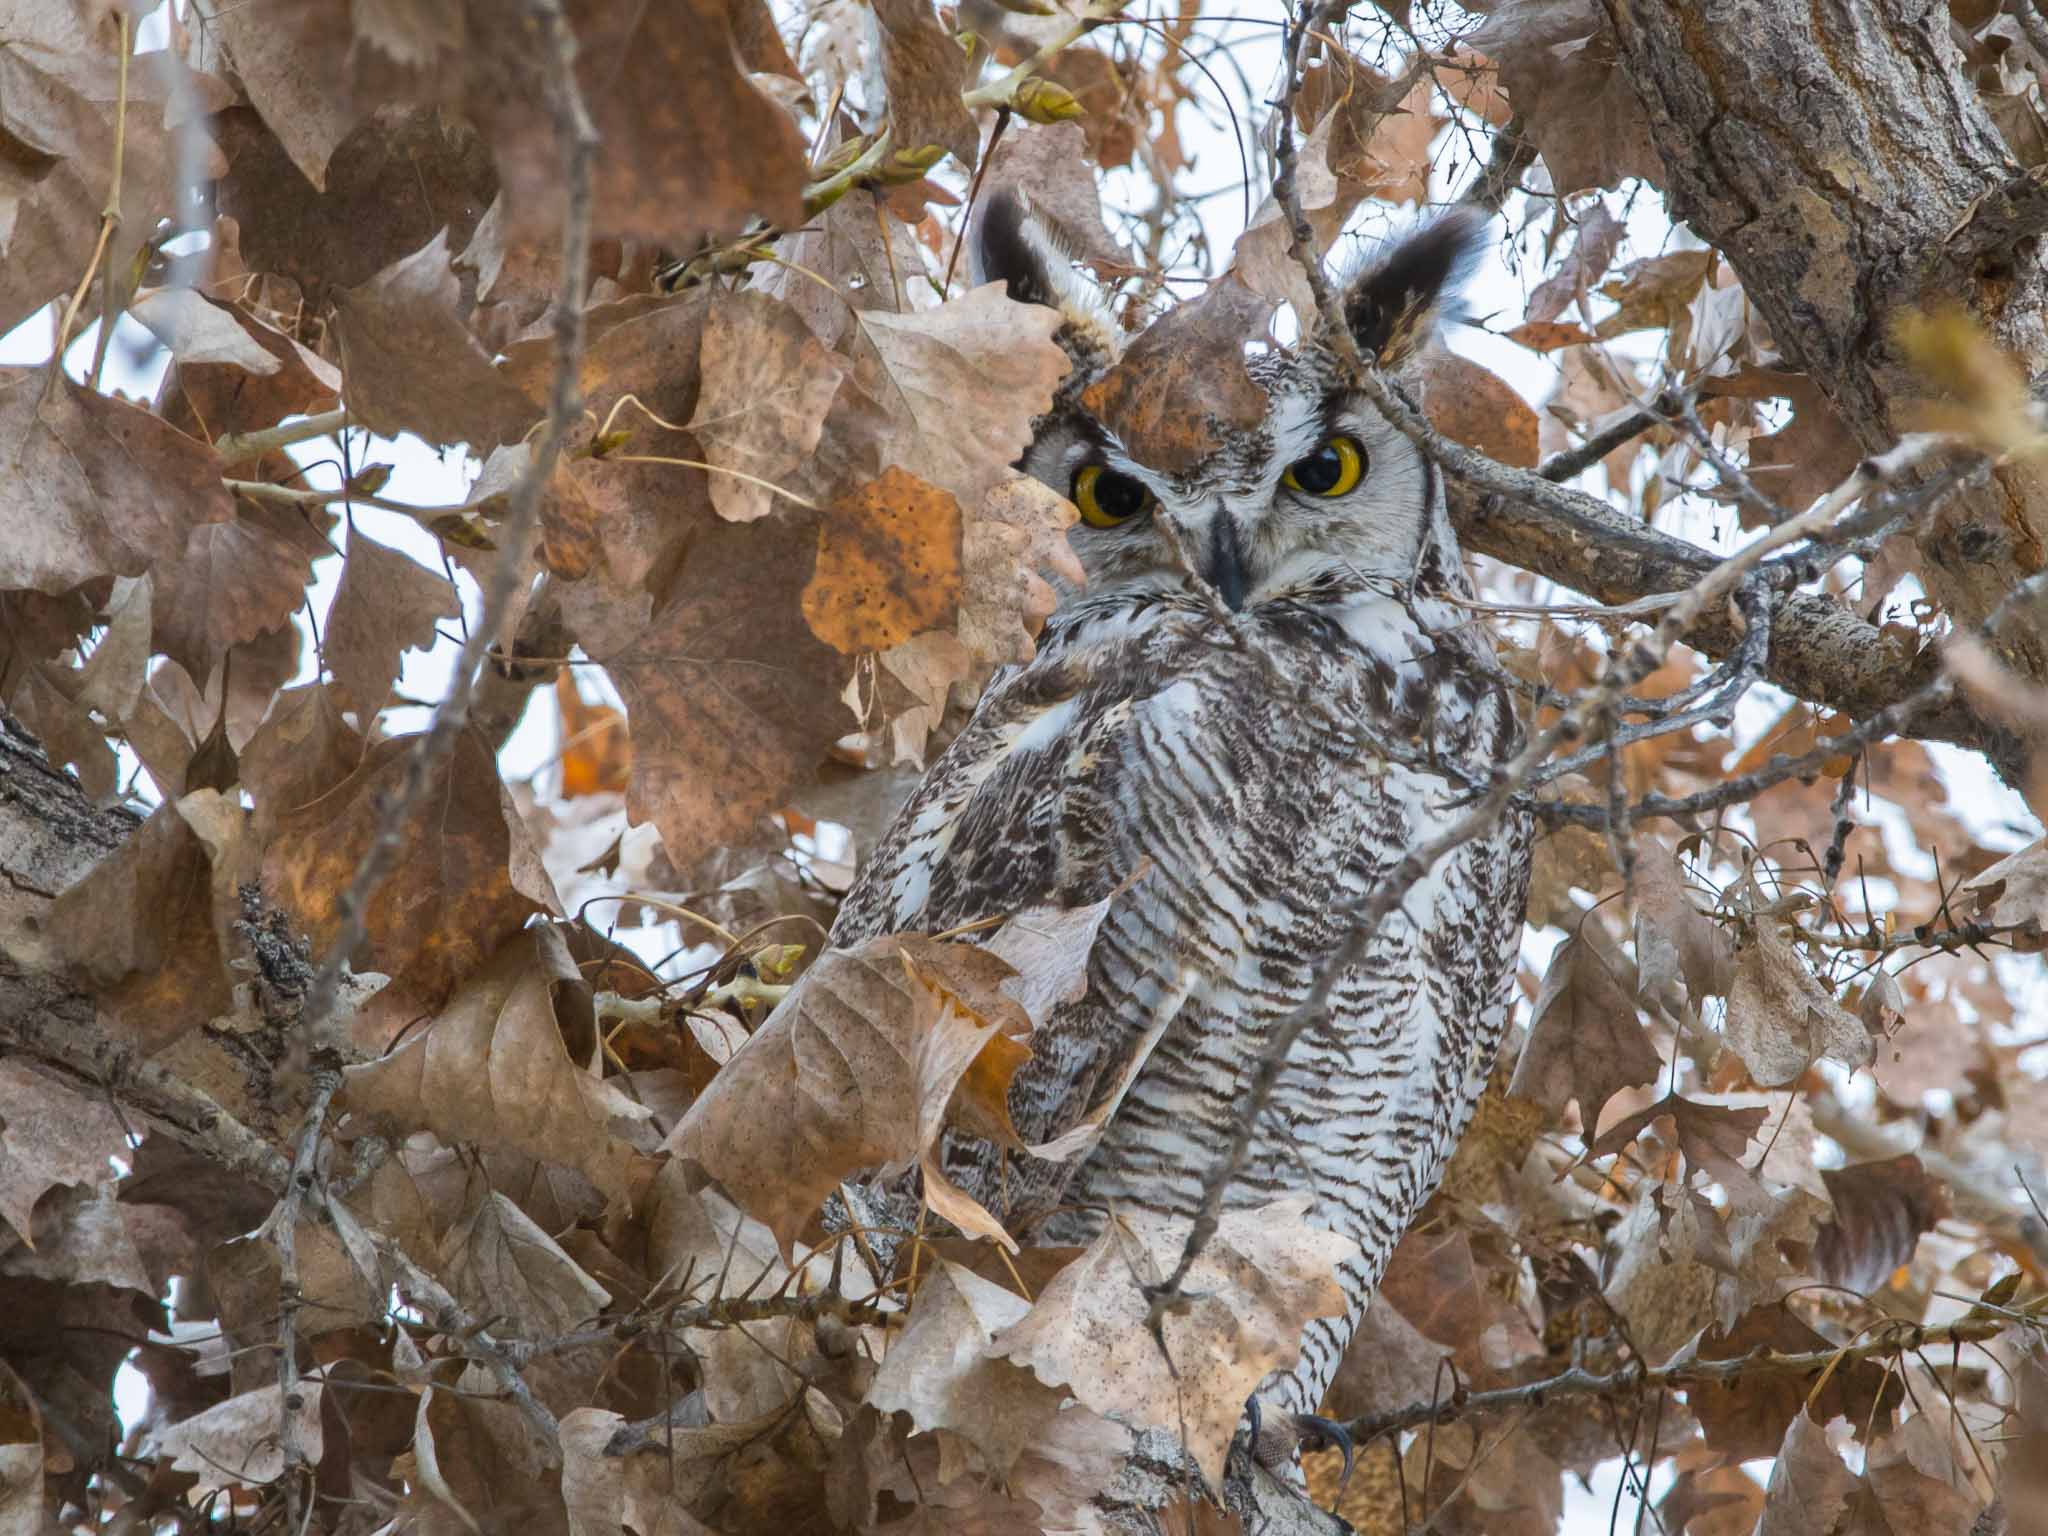 Female Great Horned Owl roosting in a cottonwood, Caballo Lake State Park, Caballo NM, December 27, 2015